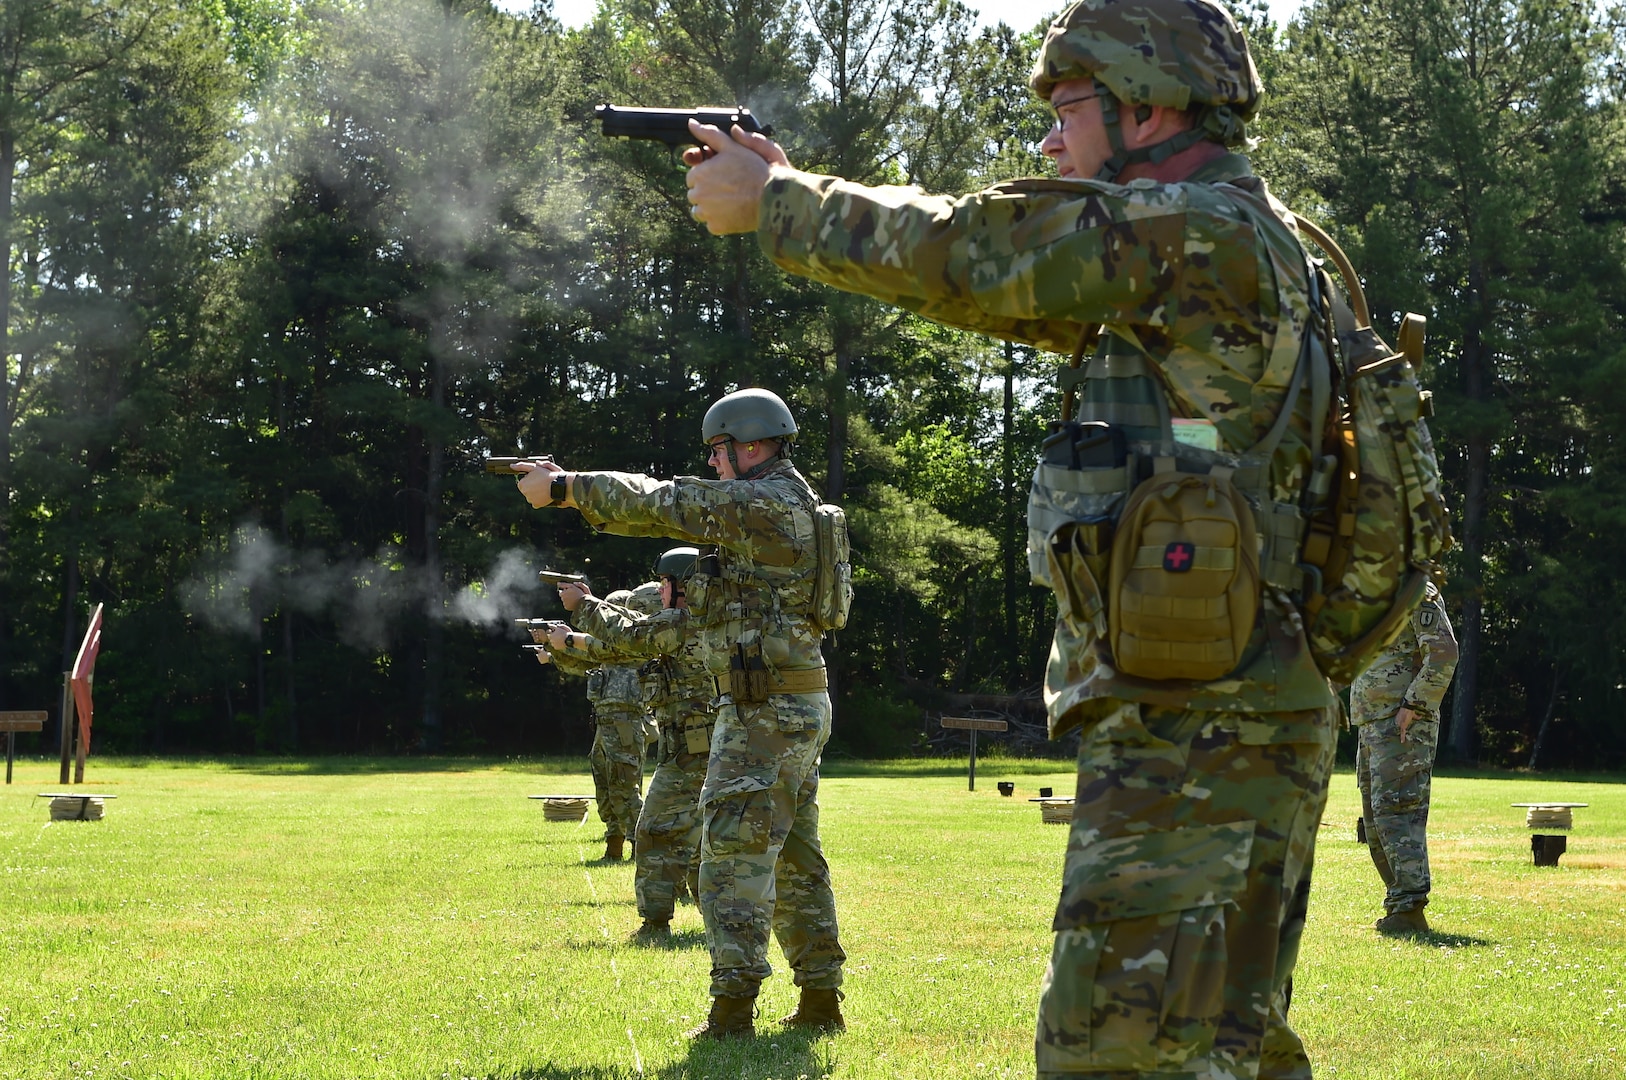 During a timed event, National Guard competitors fire rapidly at targets May 19, 2021, during the 2021 Chief, National Guard Bureau Postal Matches at Camp Butner, Hampton, North Carolina.